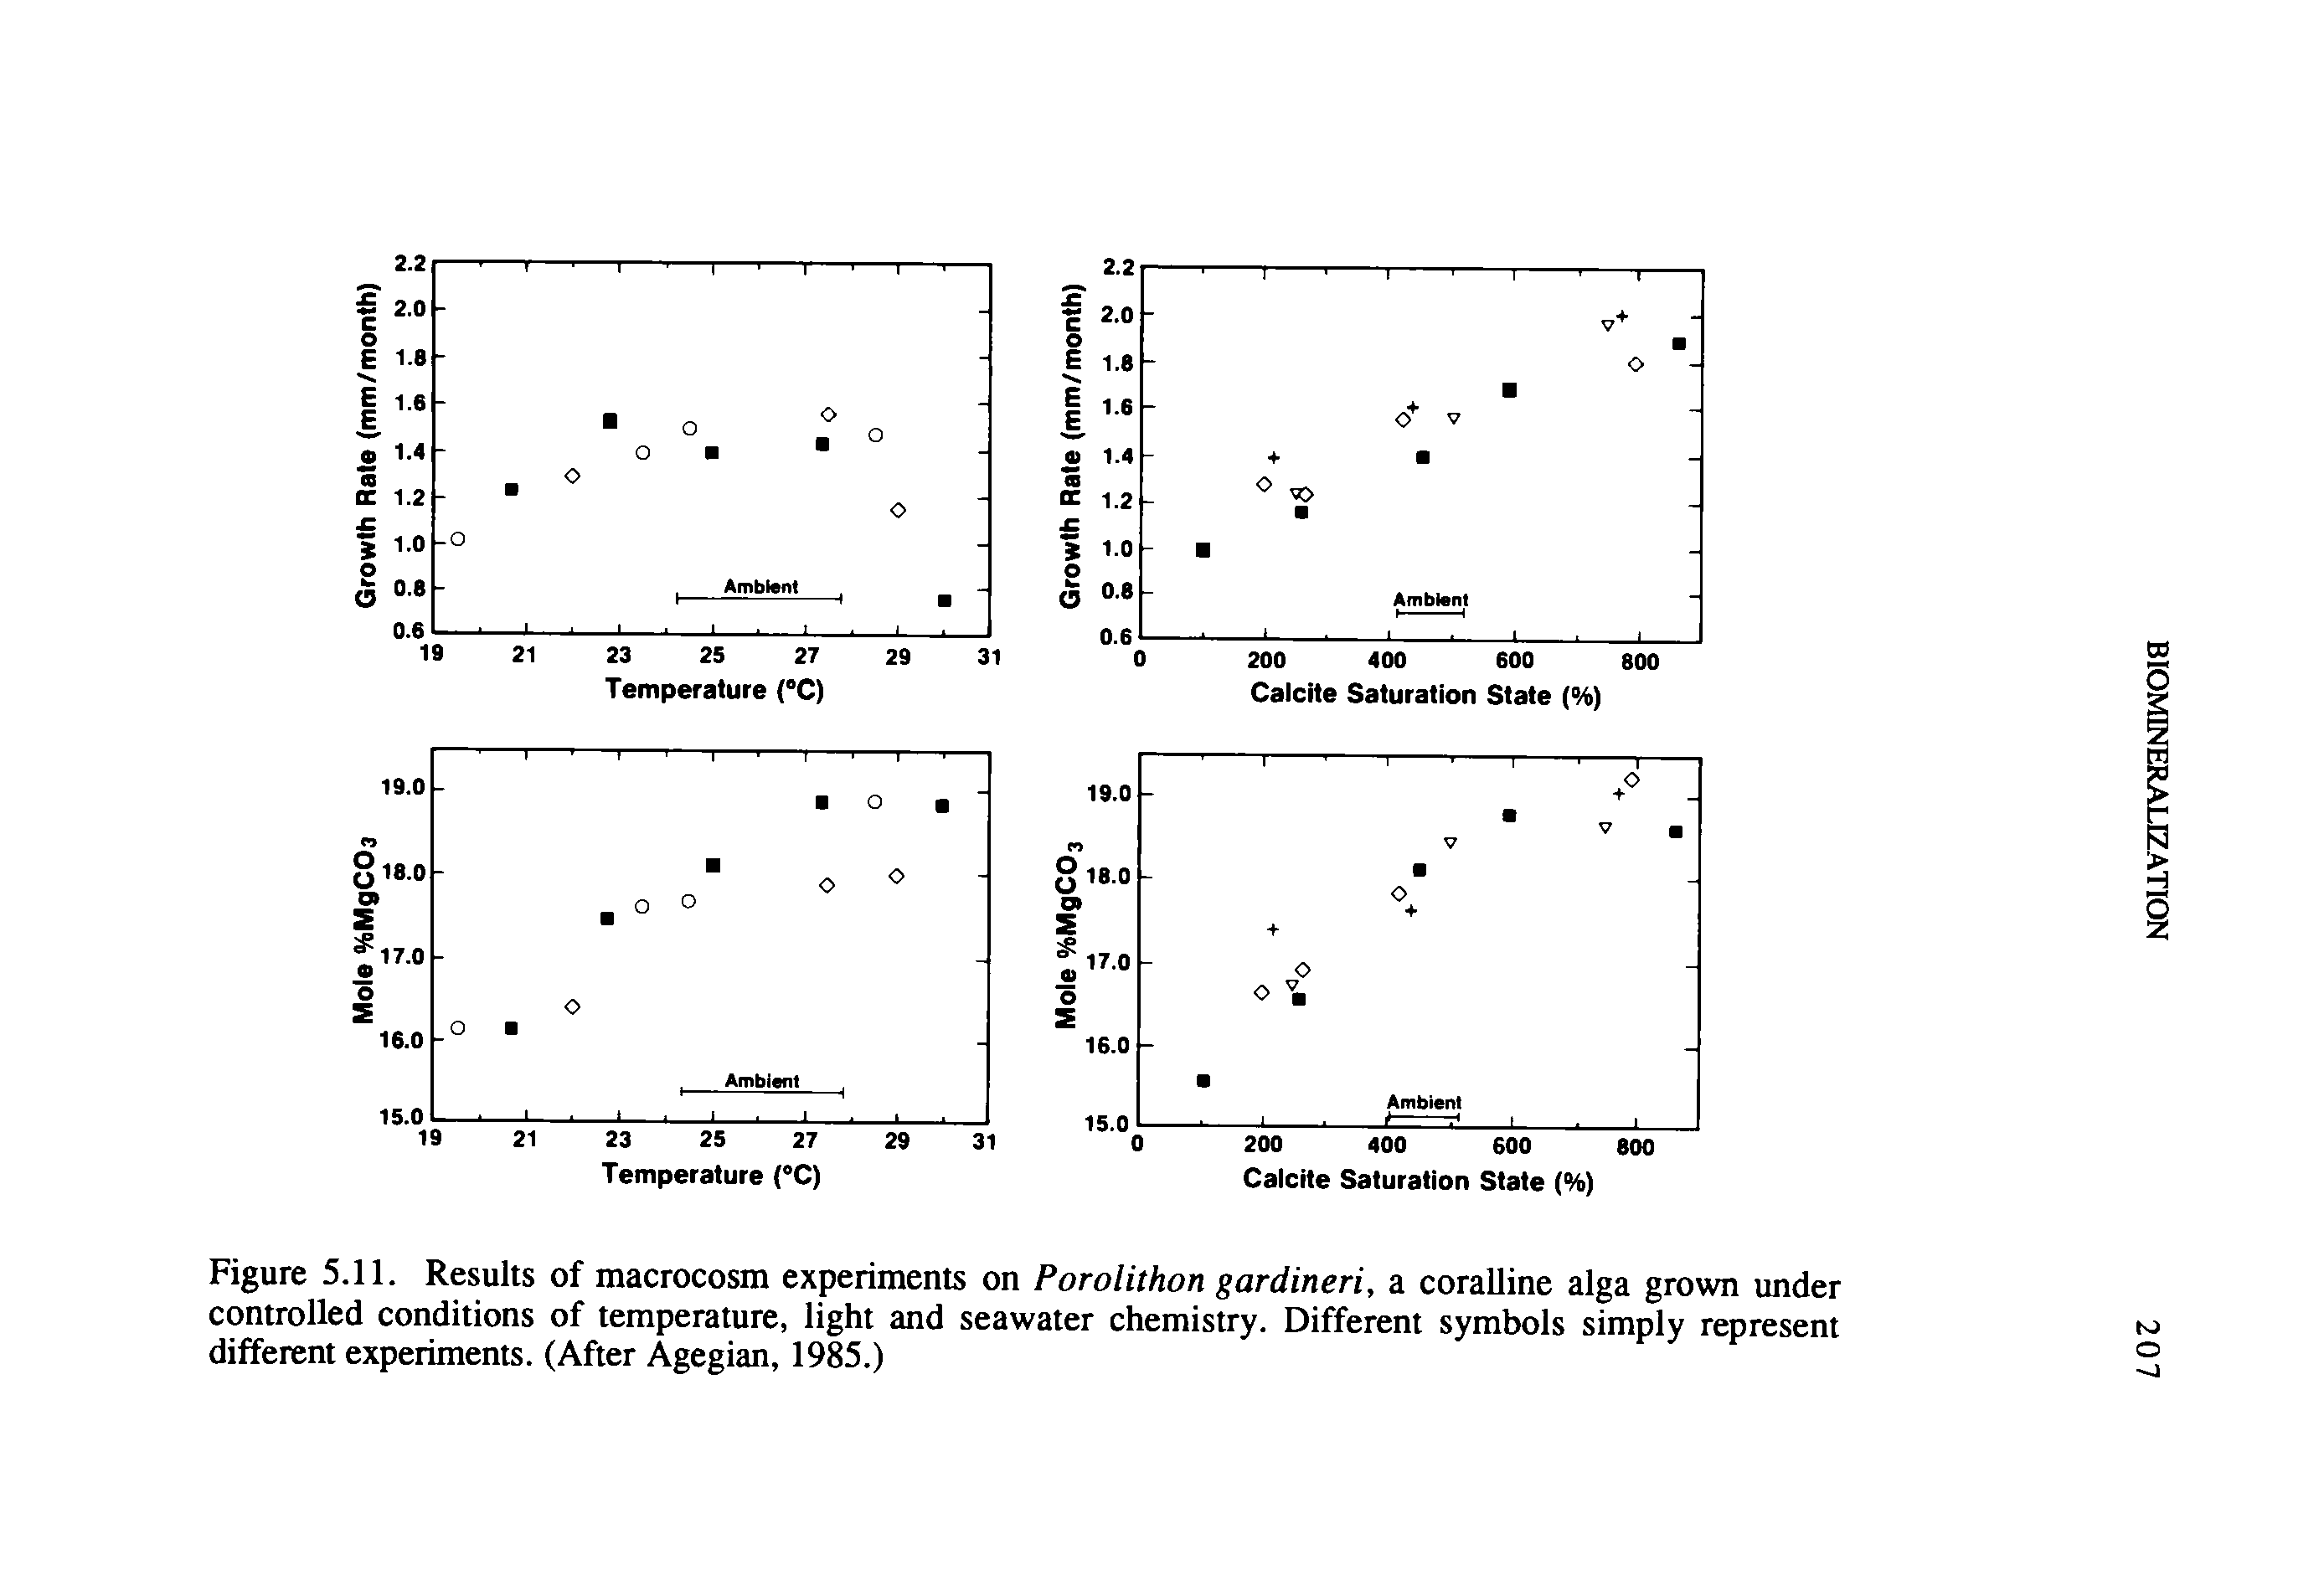 Figure 5.11. Results of macrocosm experiments on Porolithon gardineri, a coralline alga grown under controlled conditions of temperature, light and seawater chemistry. Different symbols simply represent different experiments. (After Agegian, 1985.)...